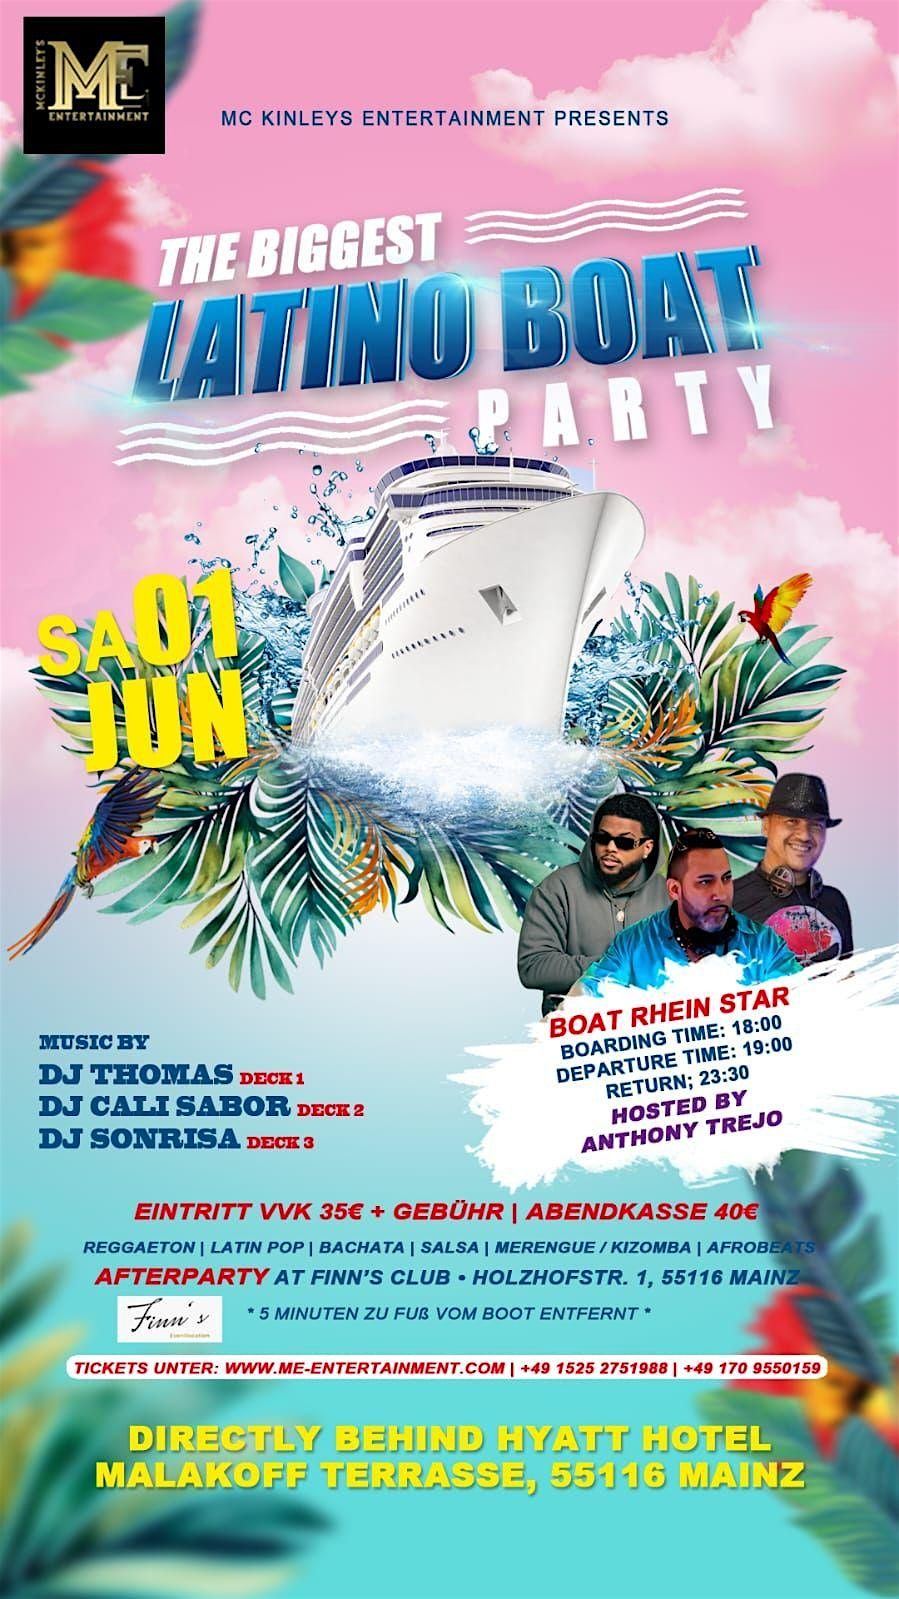 The Biggest Summer Latino Boat party